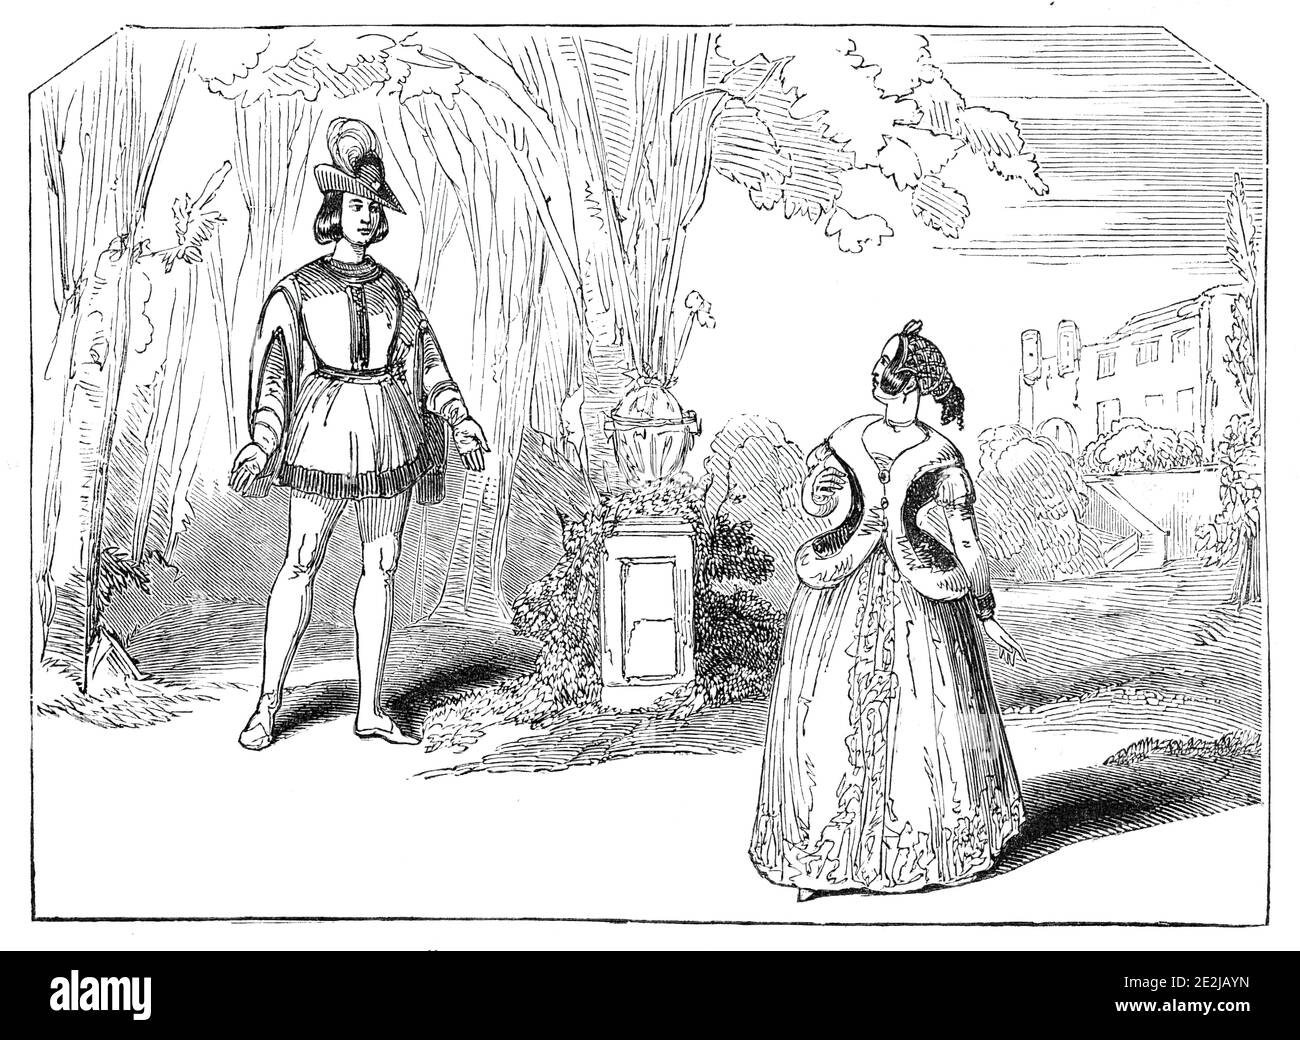 Scene from &quot;Graciosa and Perciney&quot;, at the Haymarket Theatre, 1844. London stage production. 'Mr. [James Robinson] Planch&#xe9;, the originator of the elegant school of burlesque - has again drawn from the graceful stories of the Countess d'Anois, and produced a new dramatic nursery tale, entitled &quot;Graciosa and Percinet&quot;...'The dialogue is smart, and abounds with happy turns and allusions, and the mise-en-scene is unexceptionable - but still excellent and complete in its way. Several favourite arias, among them: &quot;When other lips&quot;, ' from the &quot;Bohemian Girl,&q Stock Photo